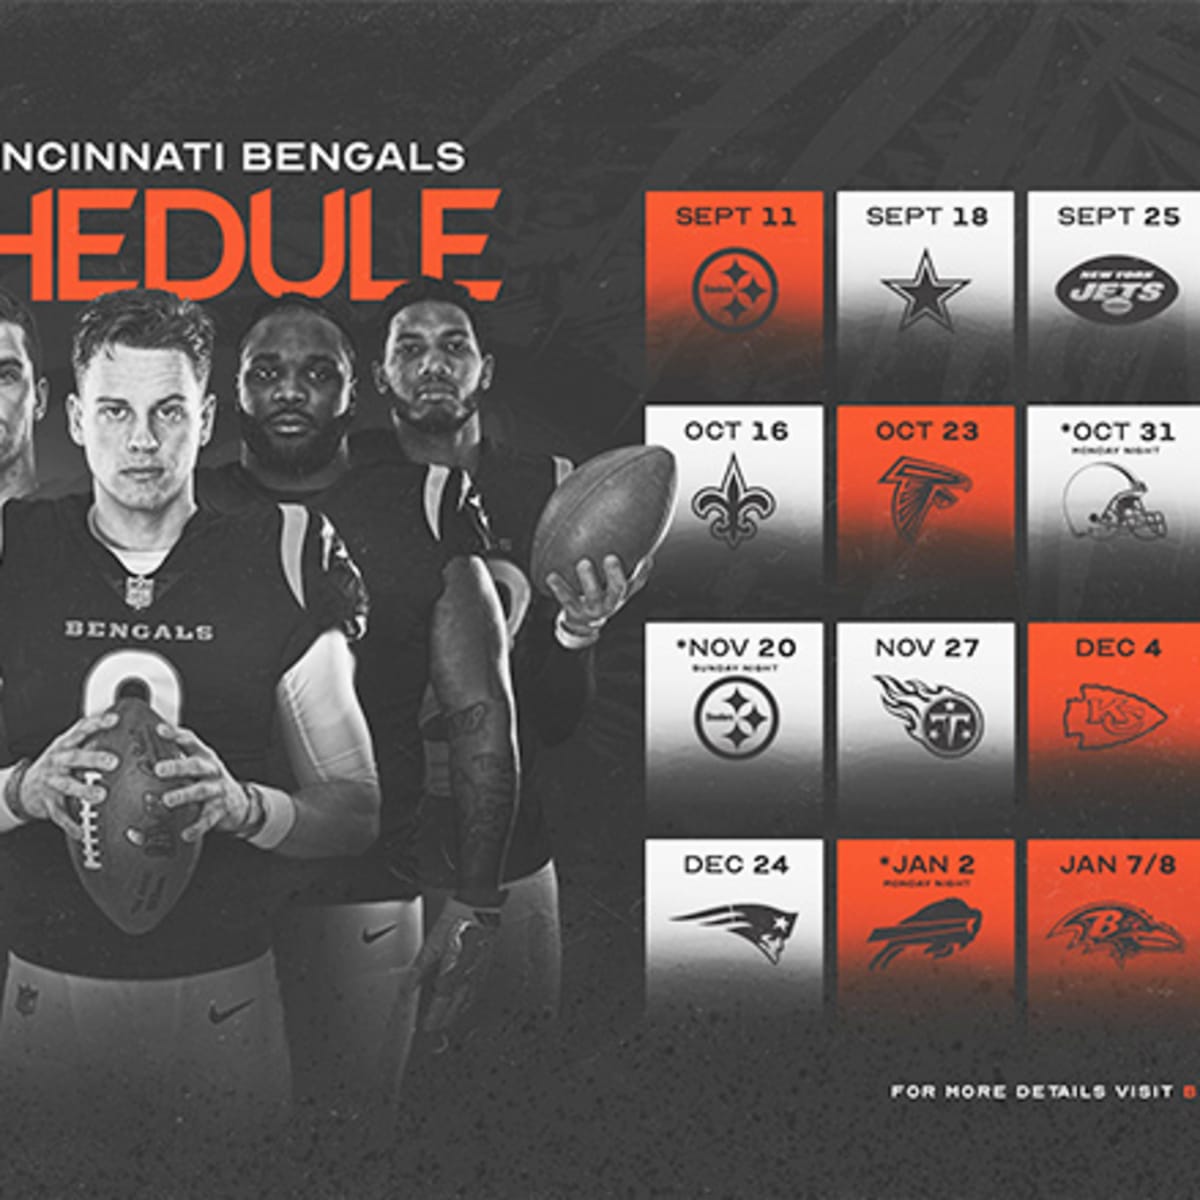 when do the bengals play on sunday